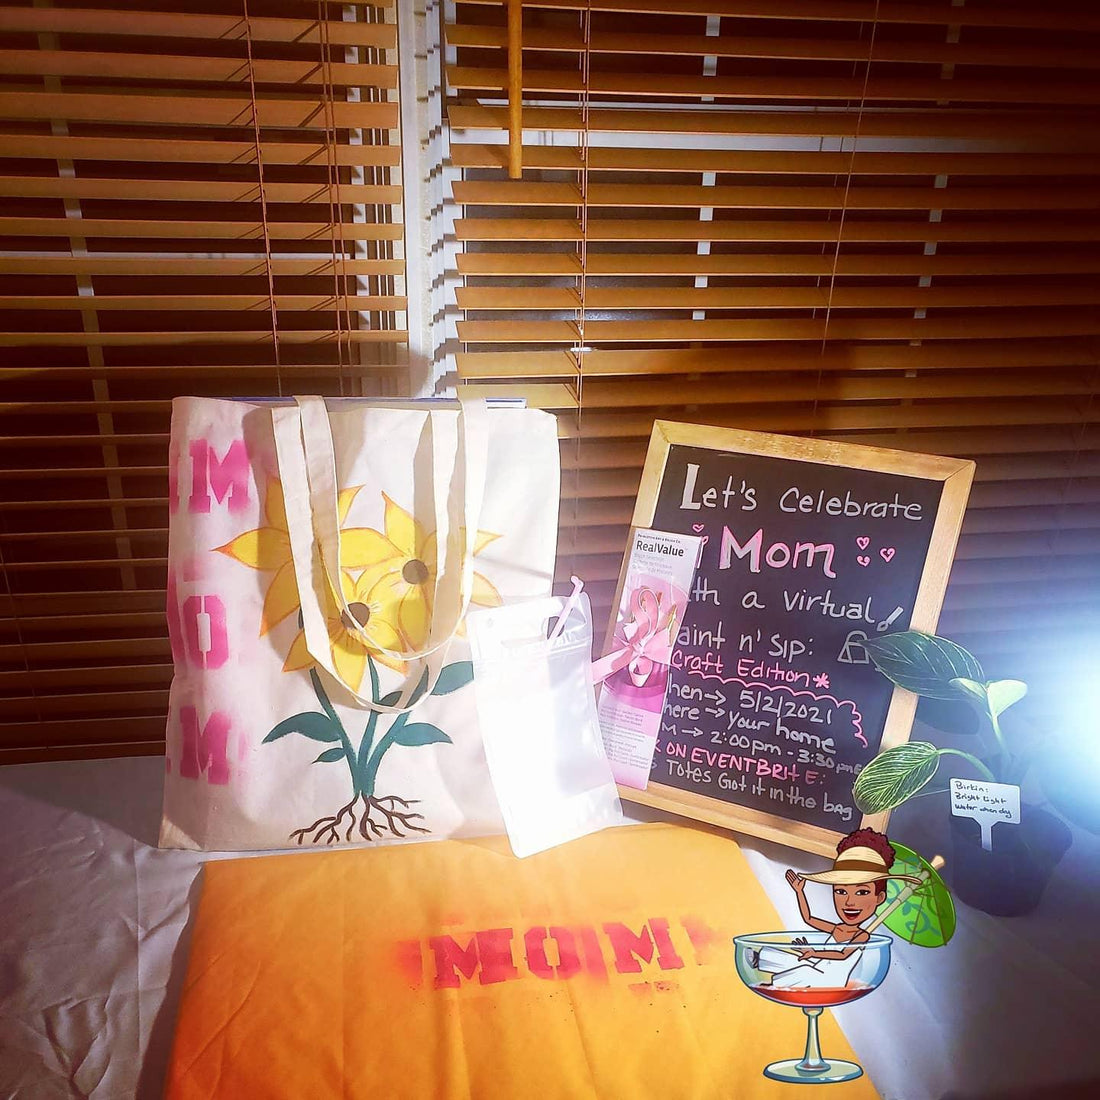 Mother's Day Craft/Paint event with KhalaqXAli - The Leafy Branch